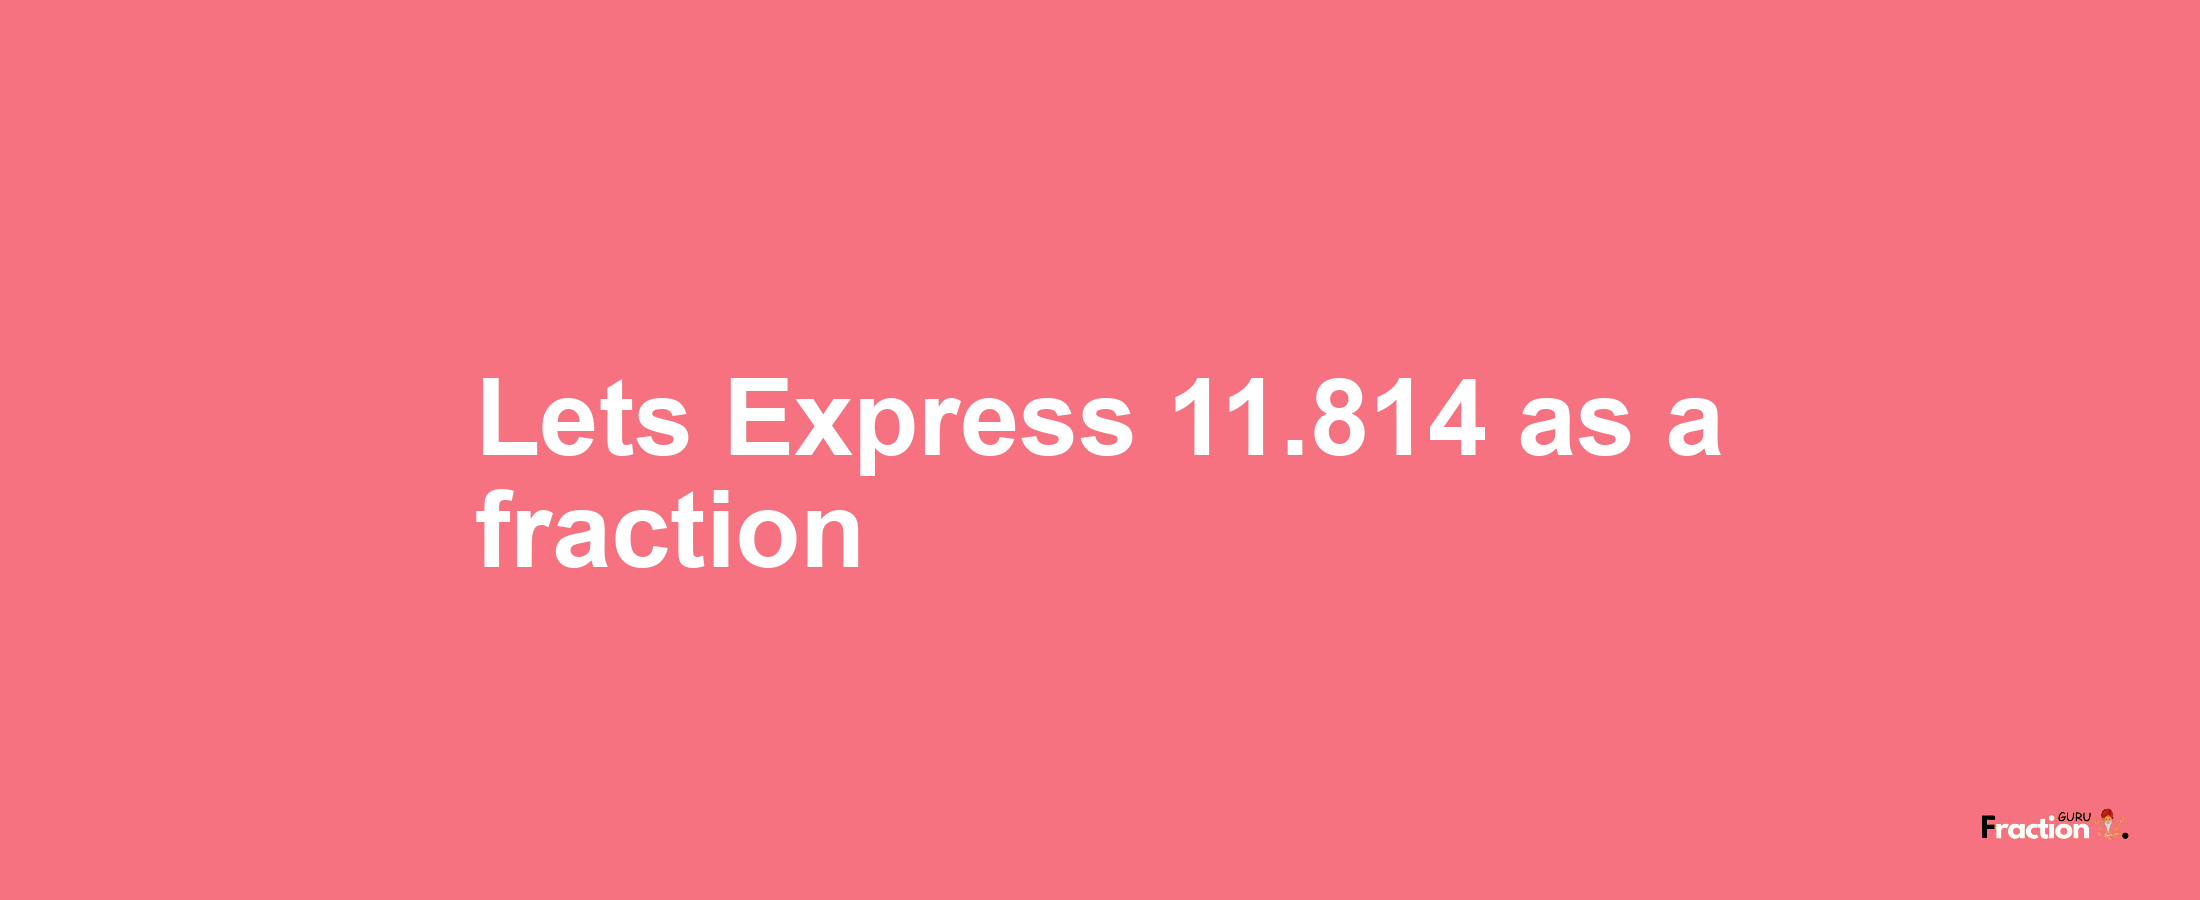 Lets Express 11.814 as afraction